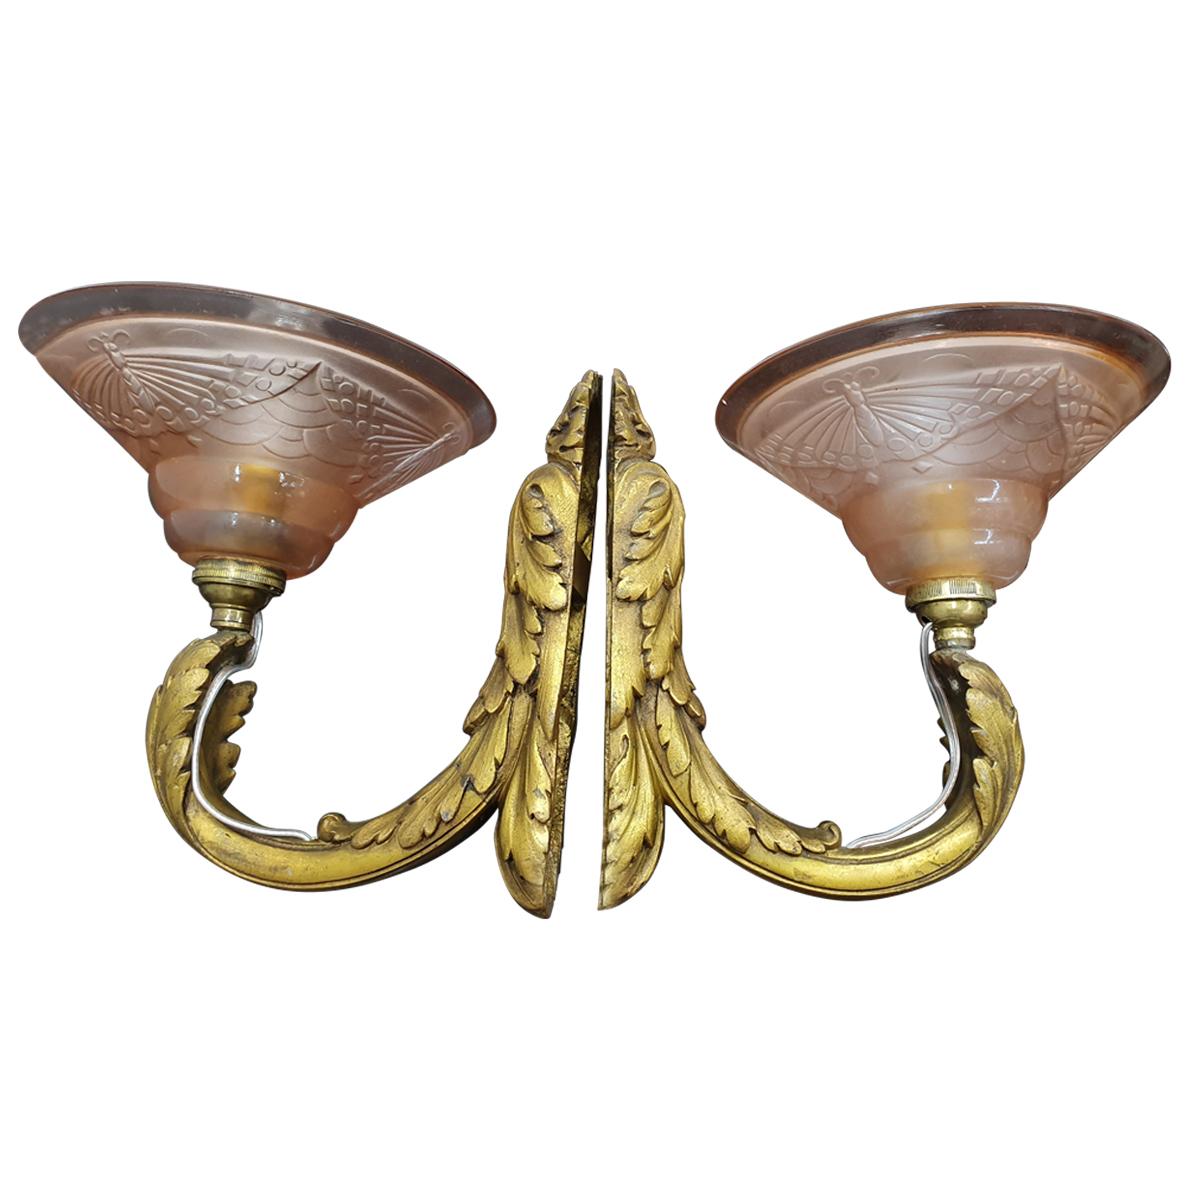 Pair of Art Deco French Bronze Sconces with Moulded Glass Shades, France